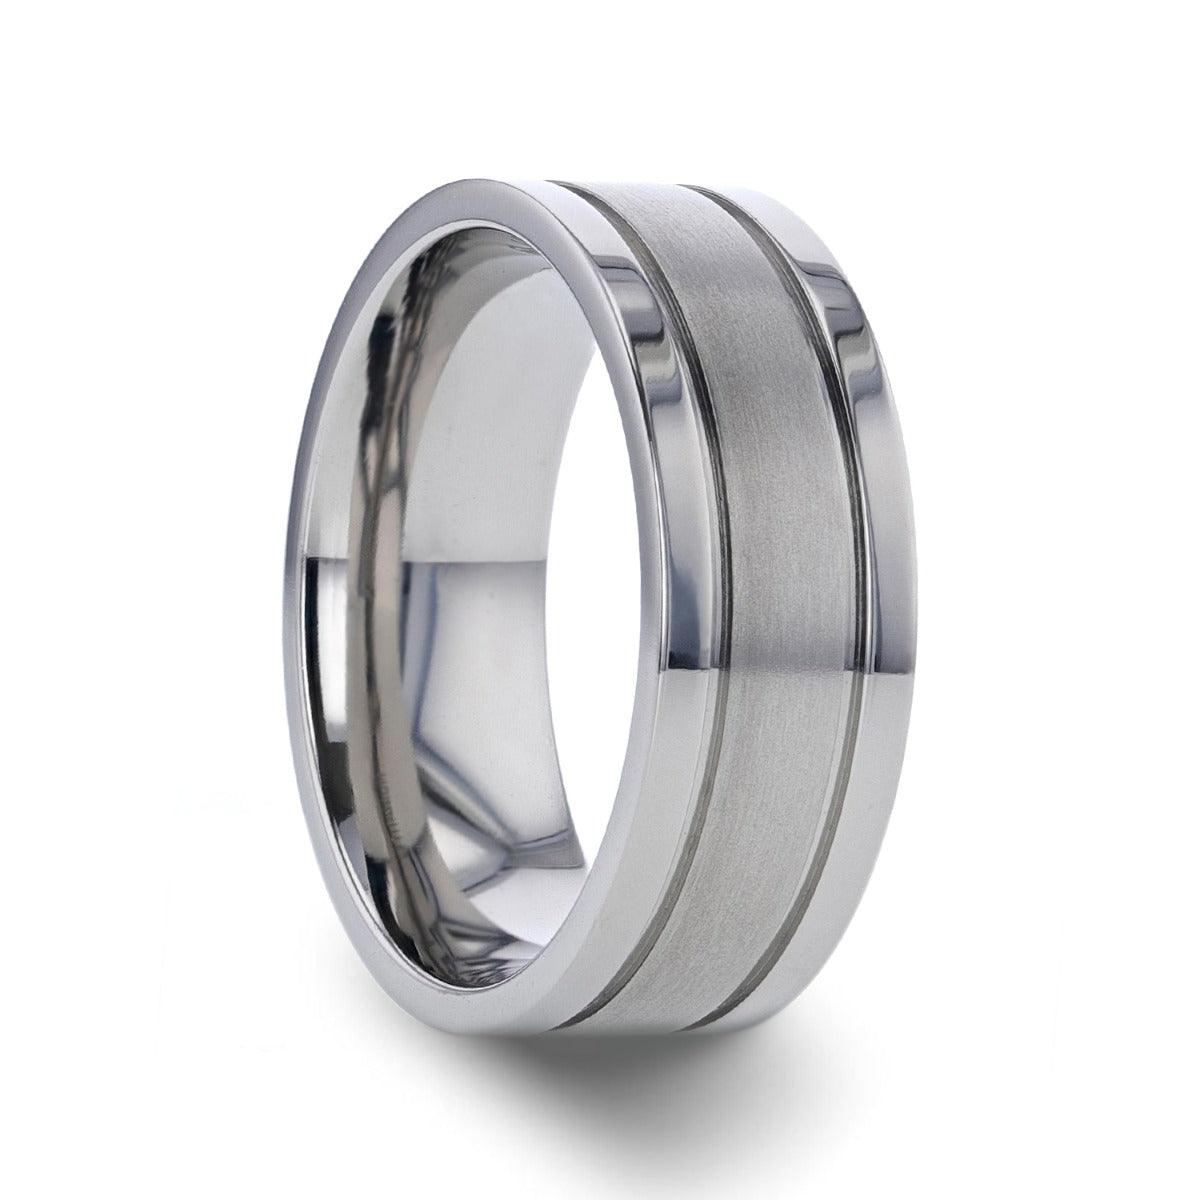 MAGNUM - Flat Titanium Wedding Ring with Brushed Center and Polished Edges - 8 mm - The Rutile Ltd